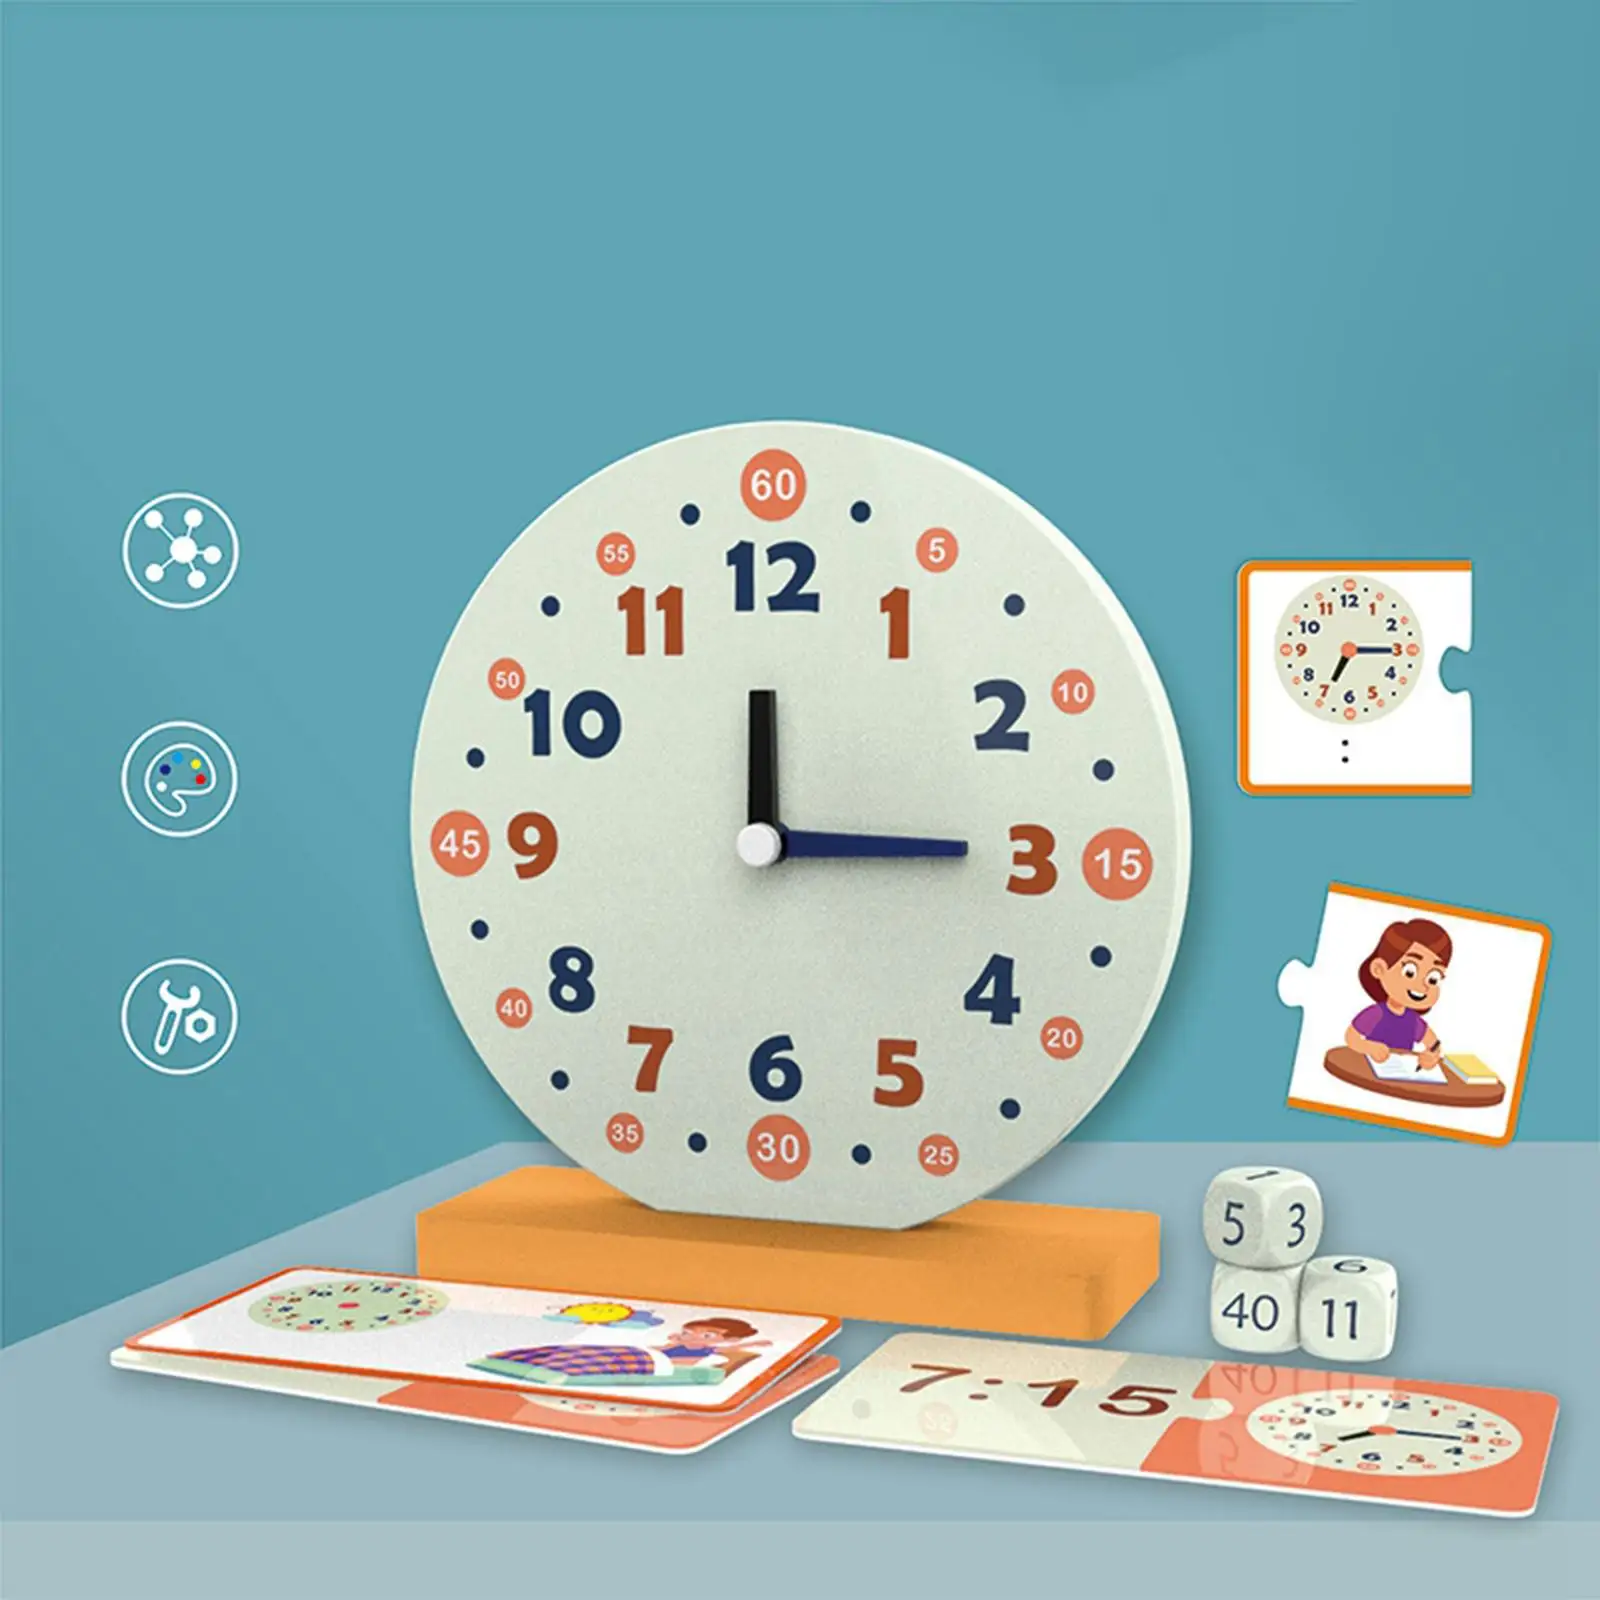 Montessori Wooden Clock Toys Hour Minute Second Cognition Activity Learn How to Tell Time Teaching Clock for Children Baby